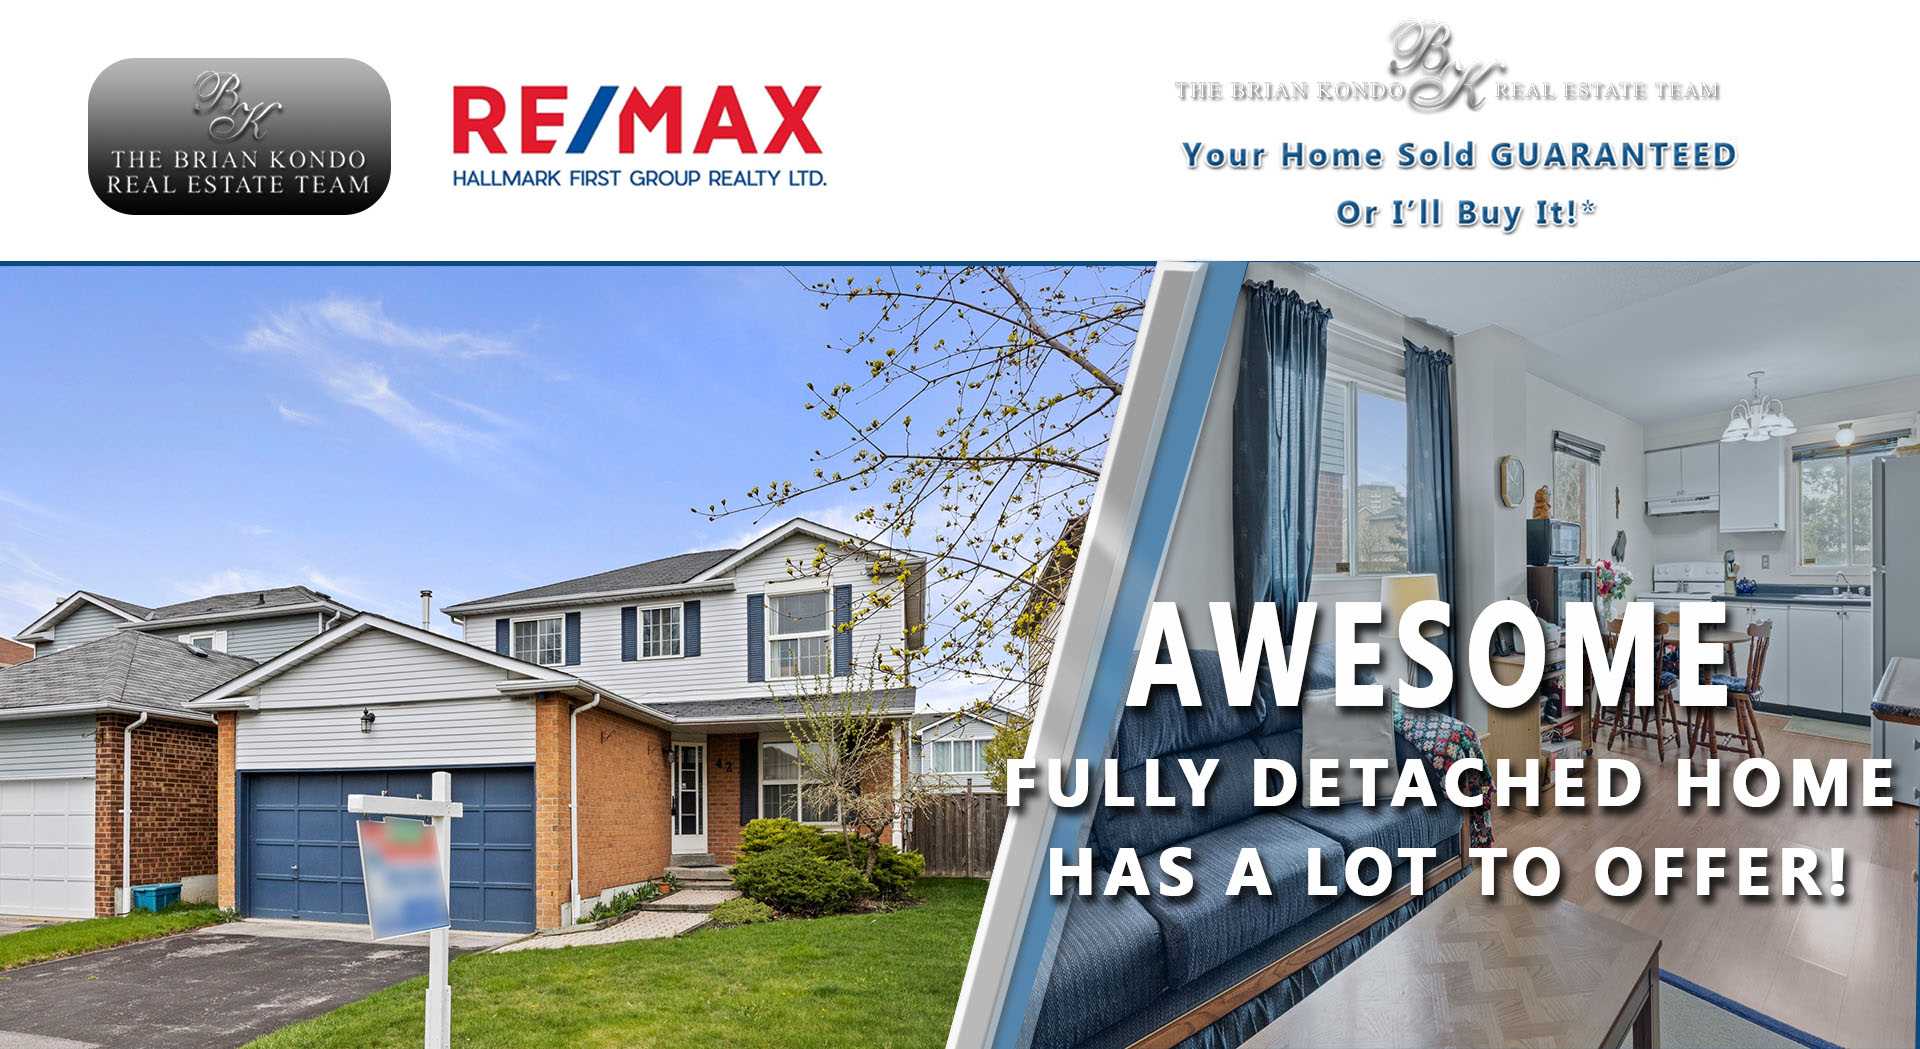 AWESOME FULLY DETACHED HOME HAS A LOT TO OFFER! | The Brian Kondo Real Estate Team